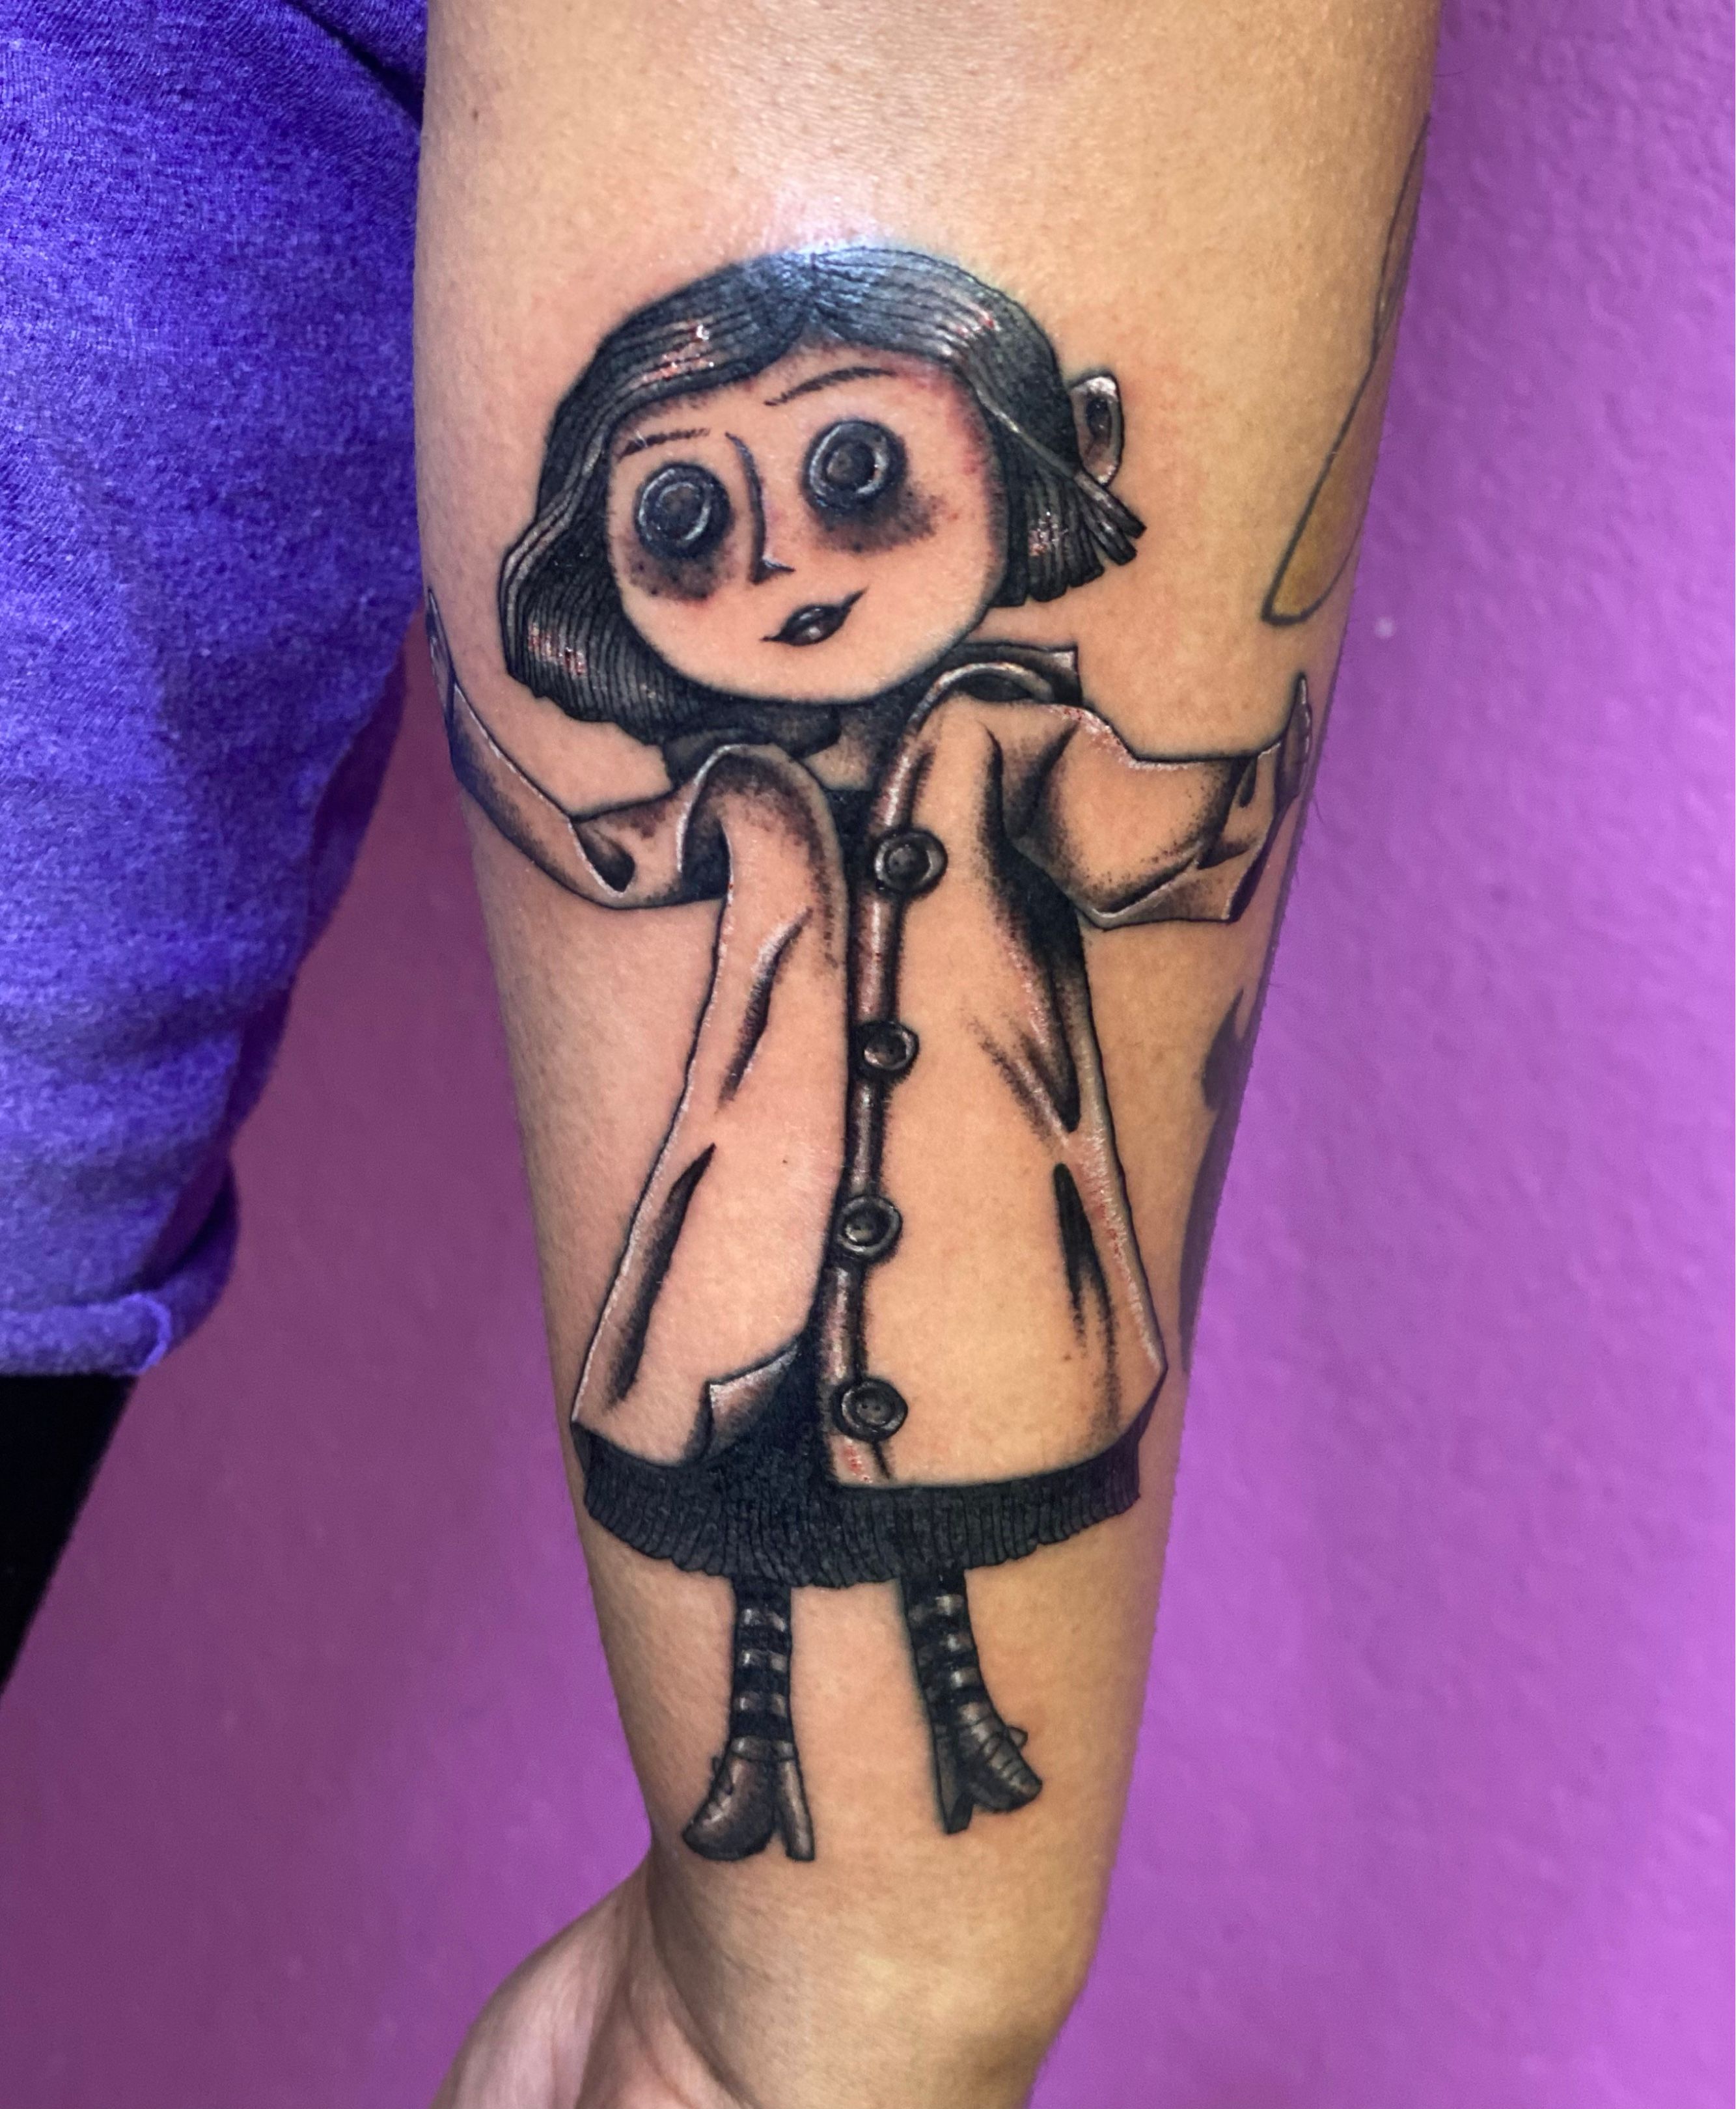 Marthyluck Tattoo  Coraline Doll Thanks Rhionna Done at  asailorsgrave  Facebook